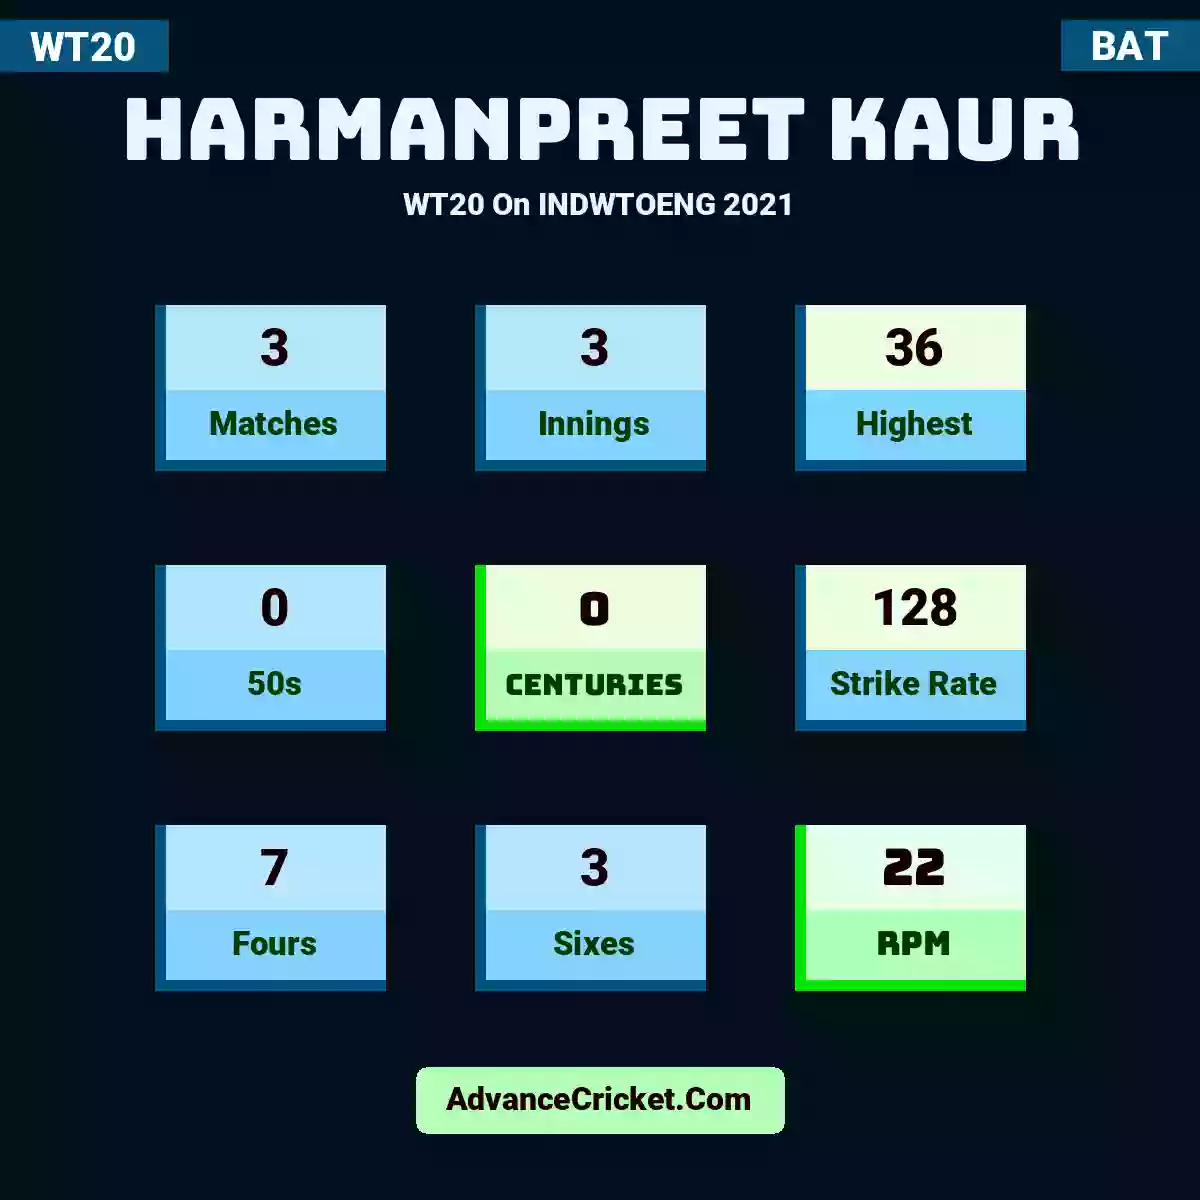 Harmanpreet Kaur WT20  On INDWTOENG 2021, Harmanpreet Kaur played 3 matches, scored 36 runs as highest, 0 half-centuries, and 0 centuries, with a strike rate of 128. H.Kaur hit 7 fours and 3 sixes, with an RPM of 22.